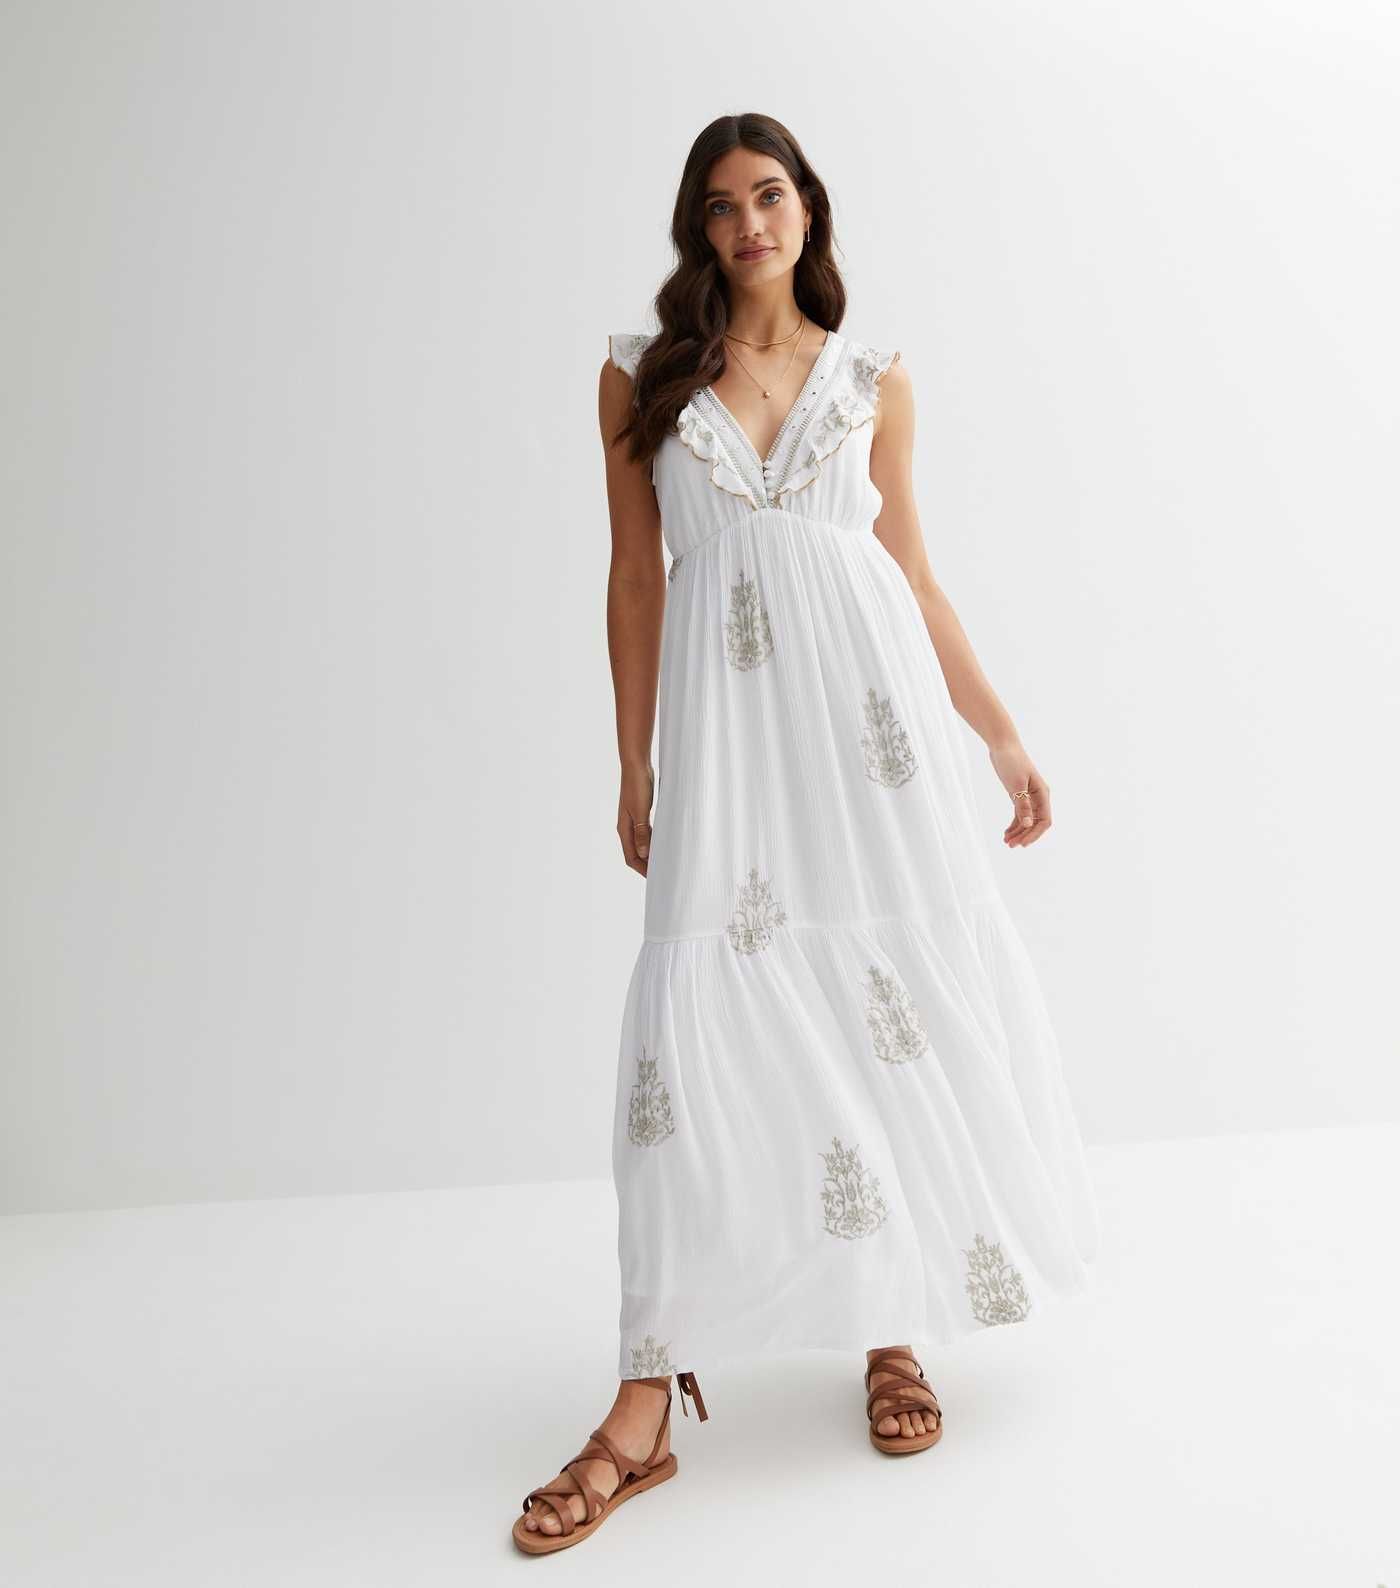 White Embroidered Frill Sleeve Maxi Dress
						
						Add to Saved Items
						Remove from Saved... | New Look (UK)